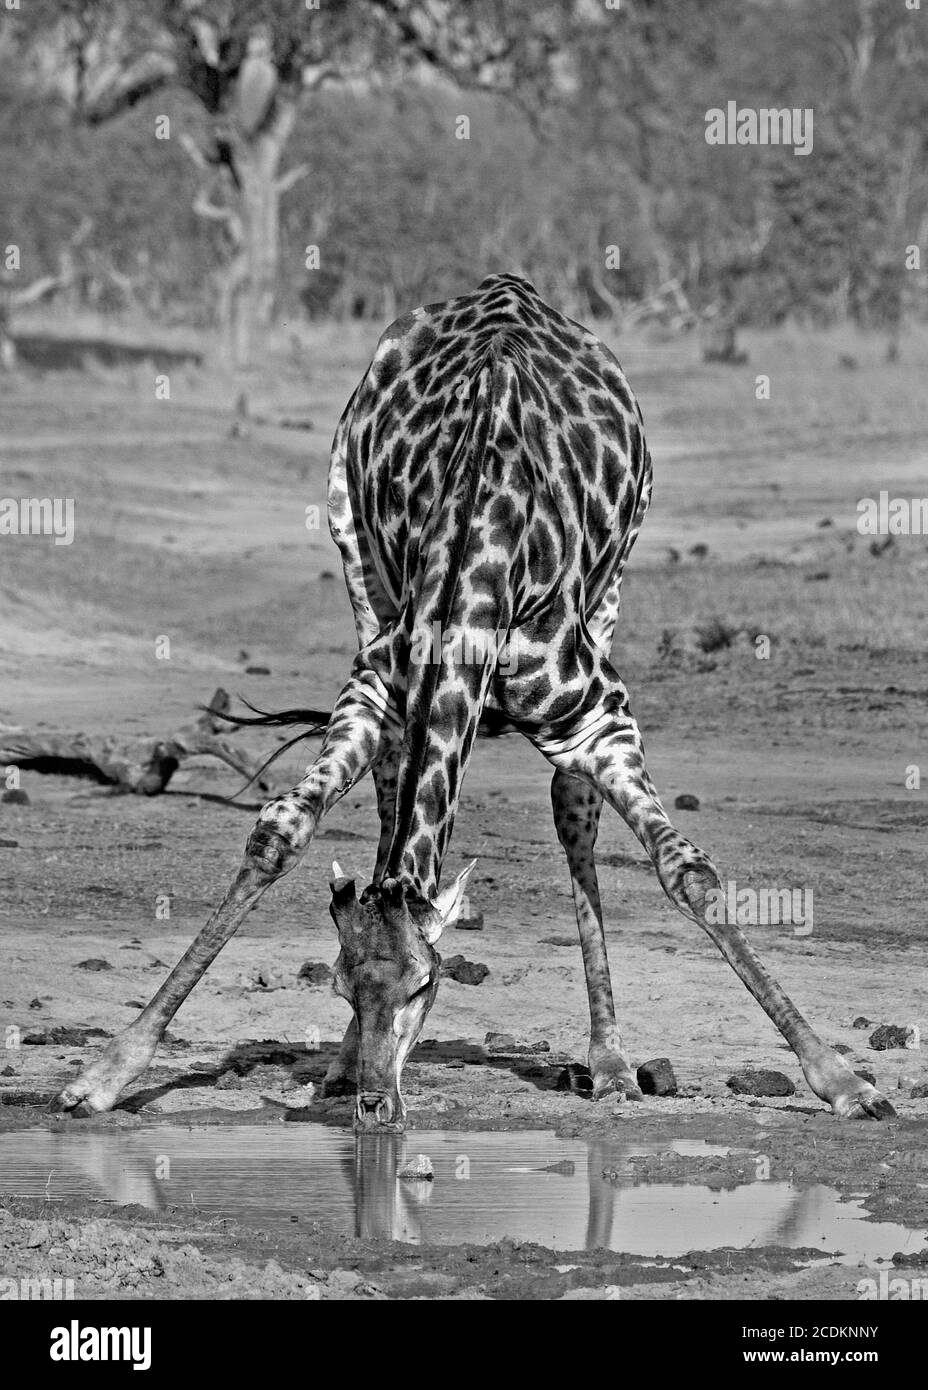 Lone Giraffe bending down taking a drink from a small puddle of water in Hwange National Park, Zimbabwe Stock Photo